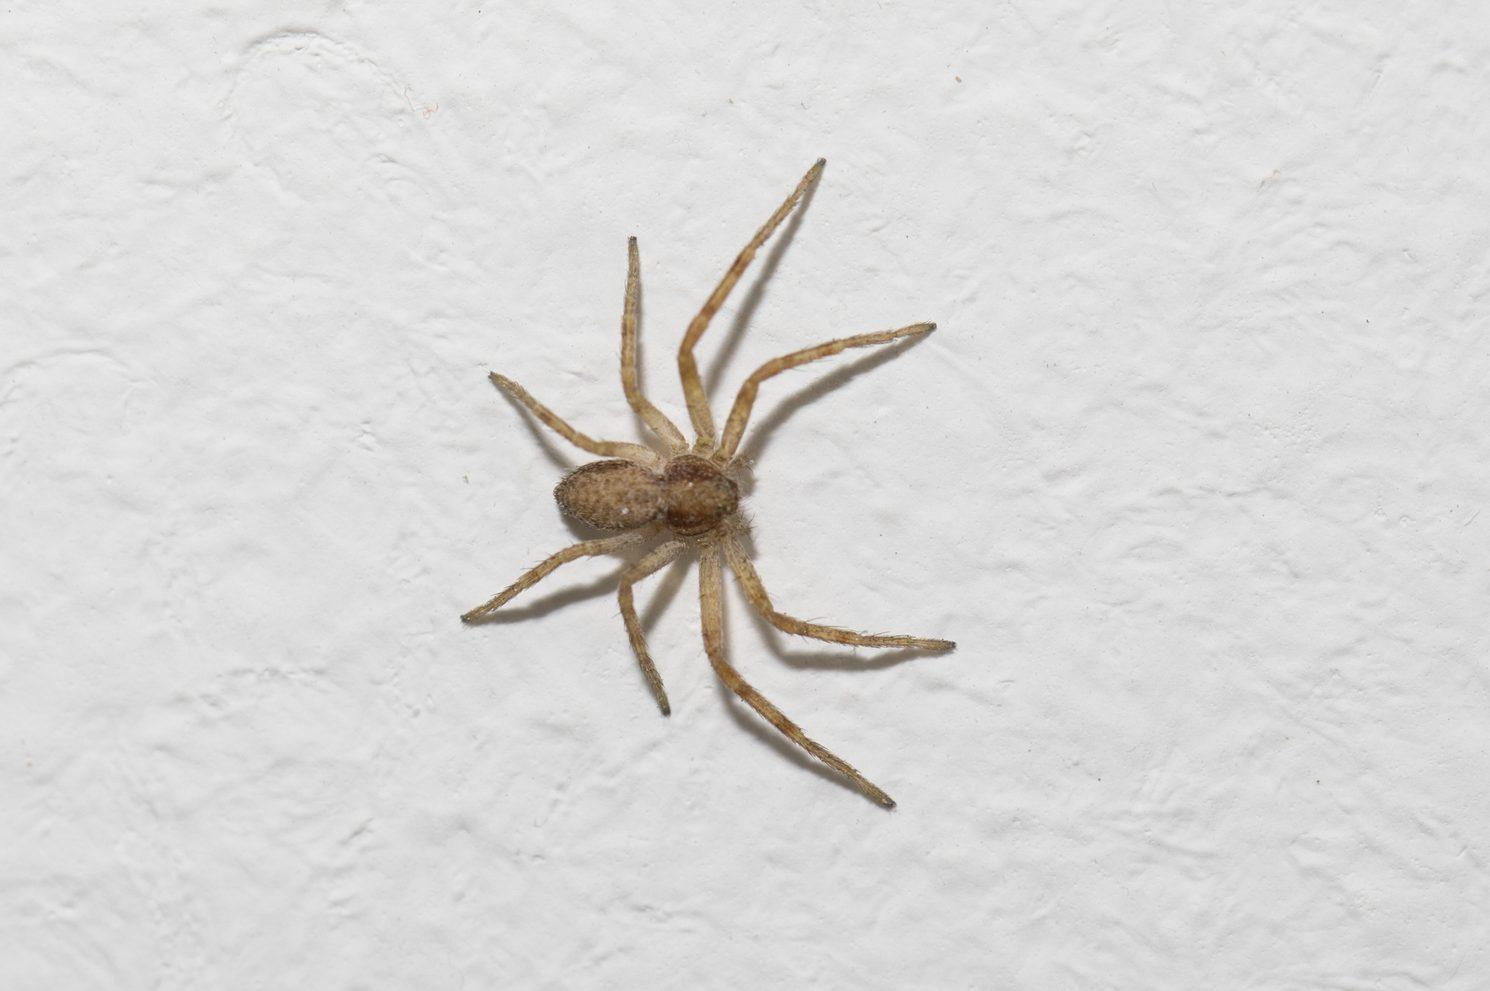 Some interesting spider species inside the house. : r/Entomology